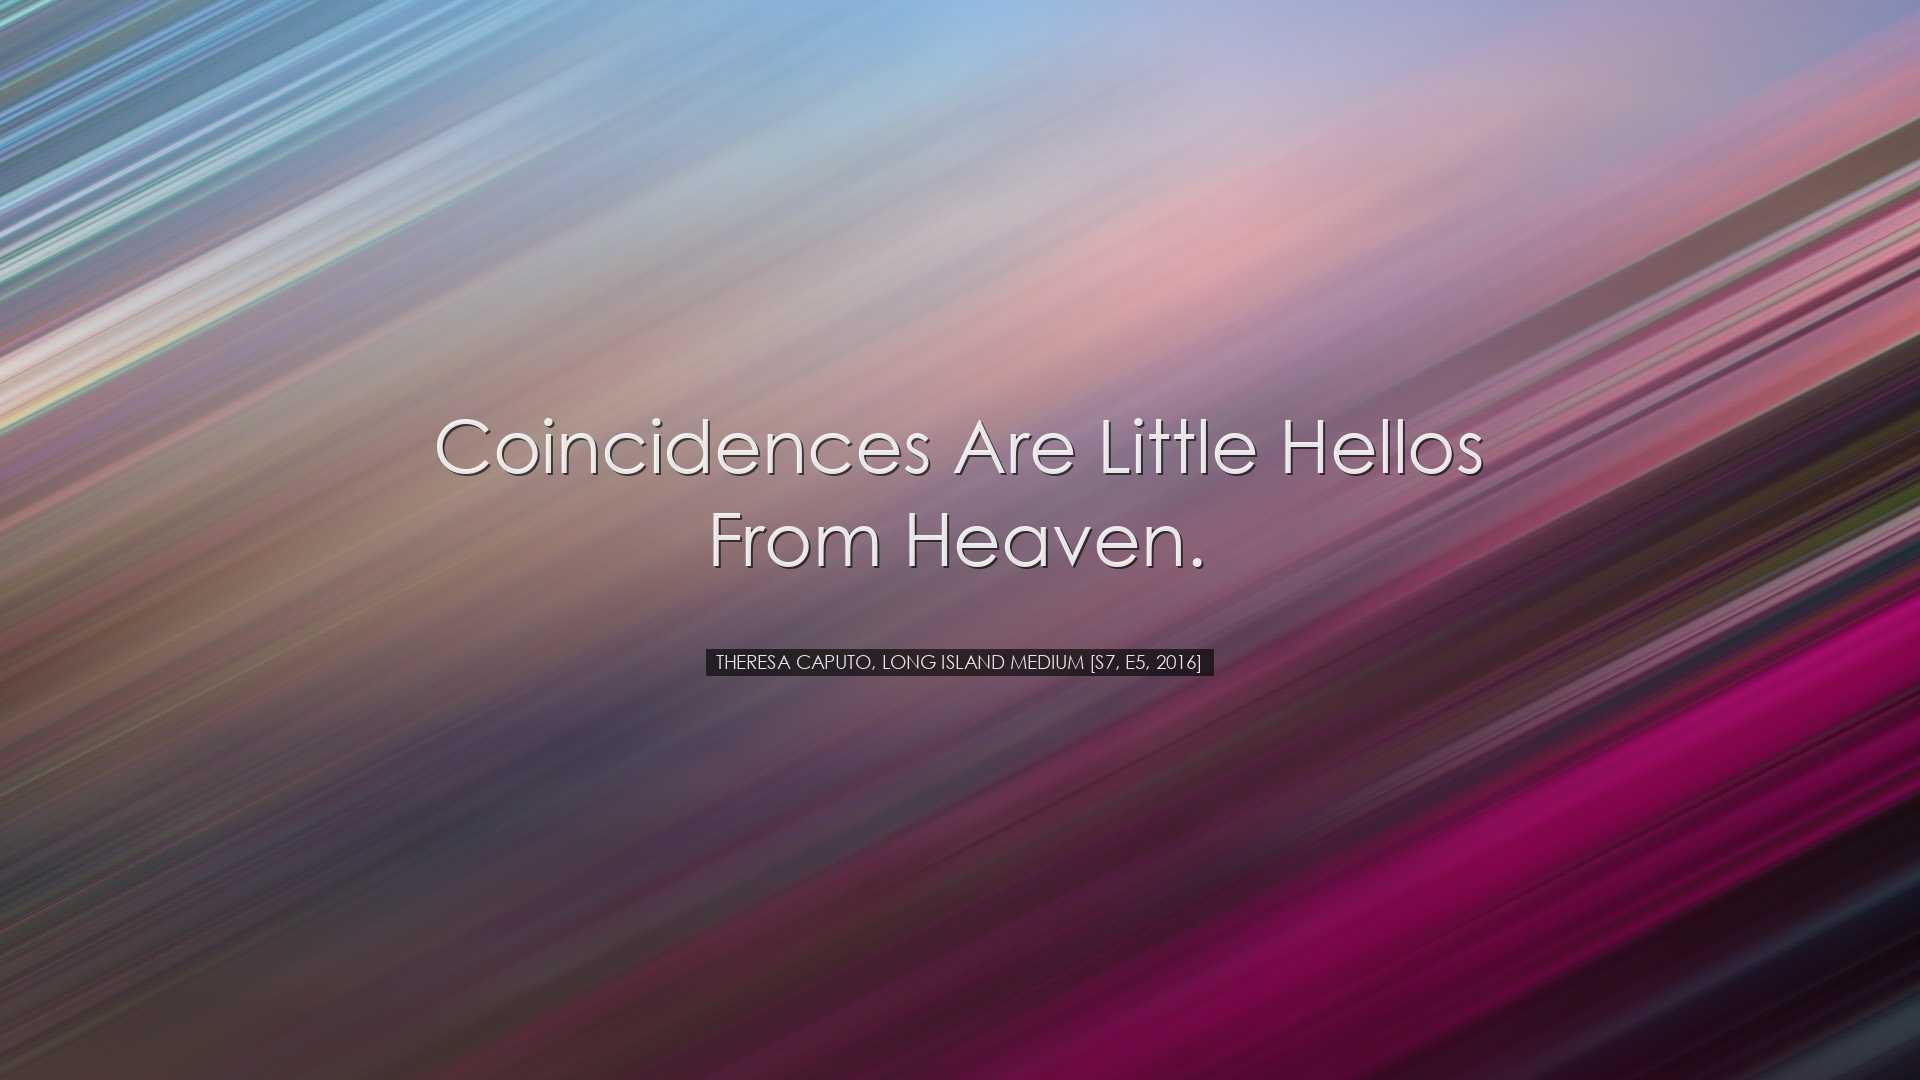 Coincidences are little hellos from heaven. - Theresa Caputo, Long